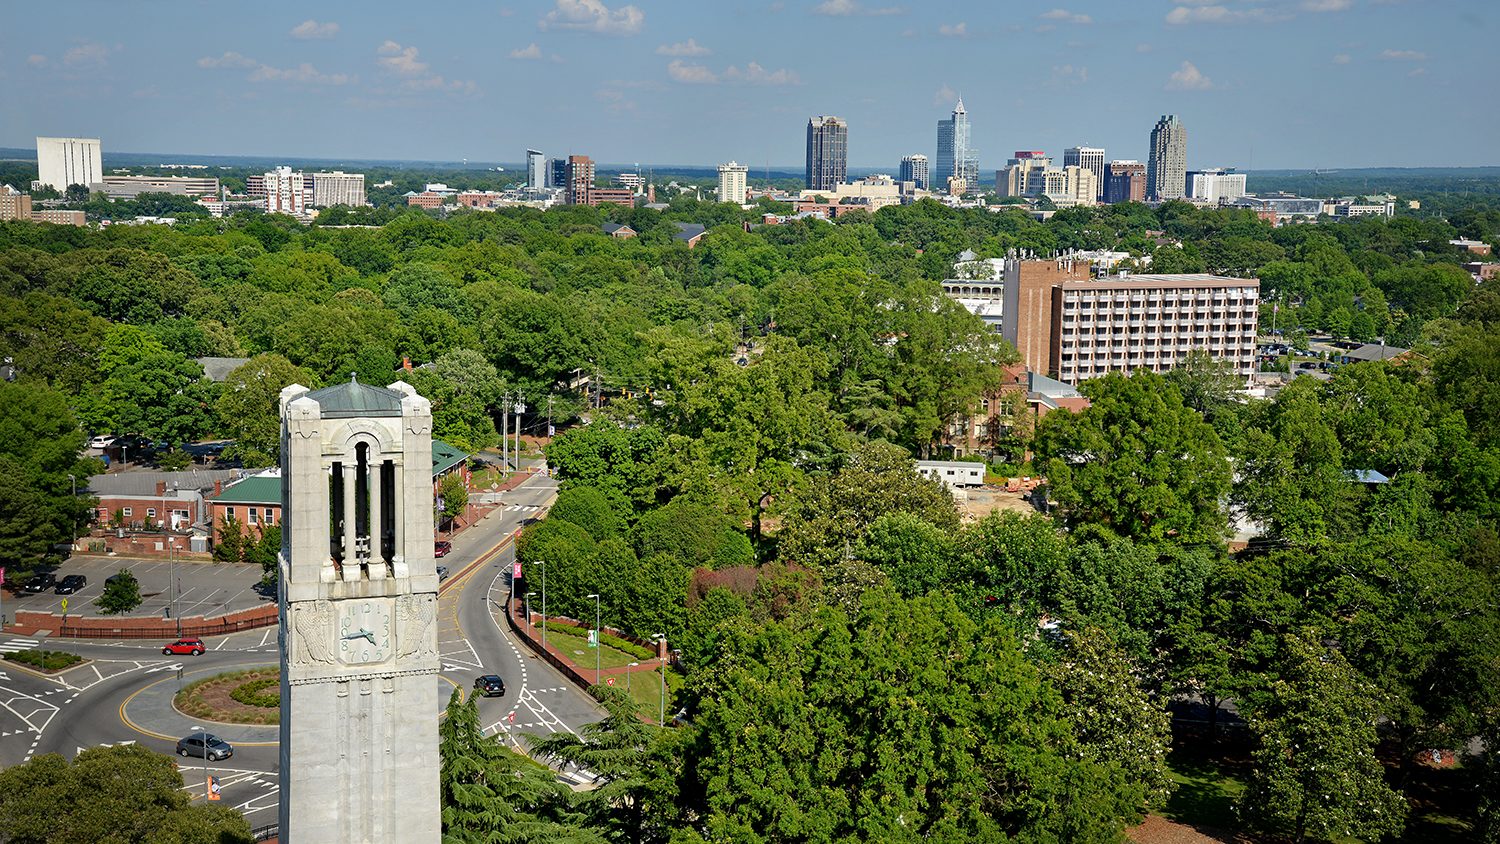 Bell Tower and Raleigh skyline.